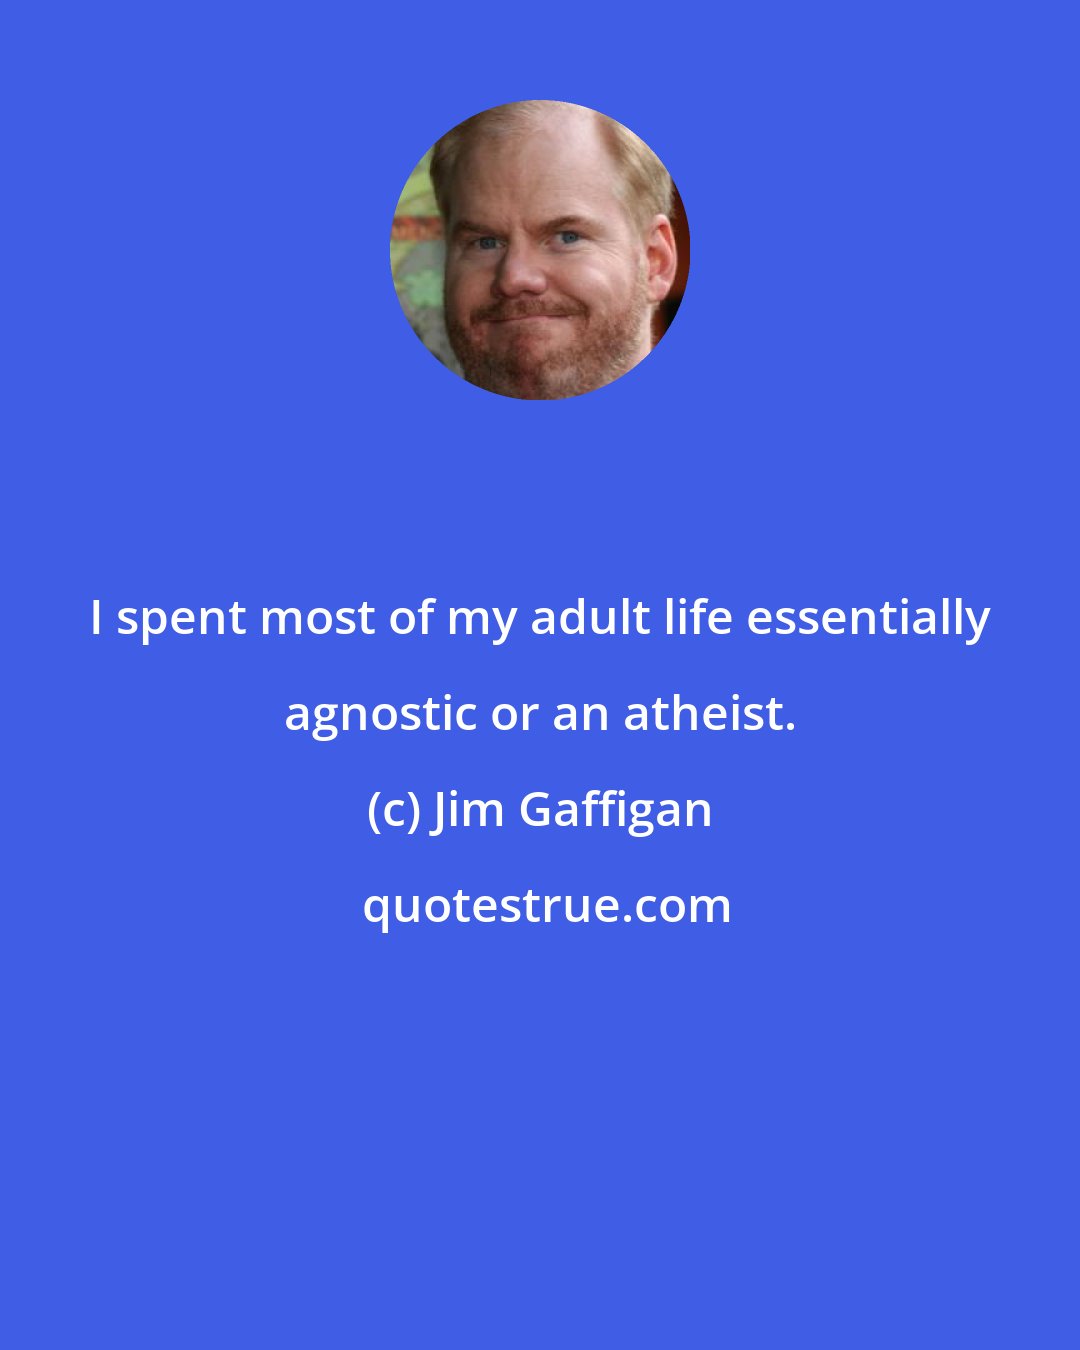 Jim Gaffigan: I spent most of my adult life essentially agnostic or an atheist.